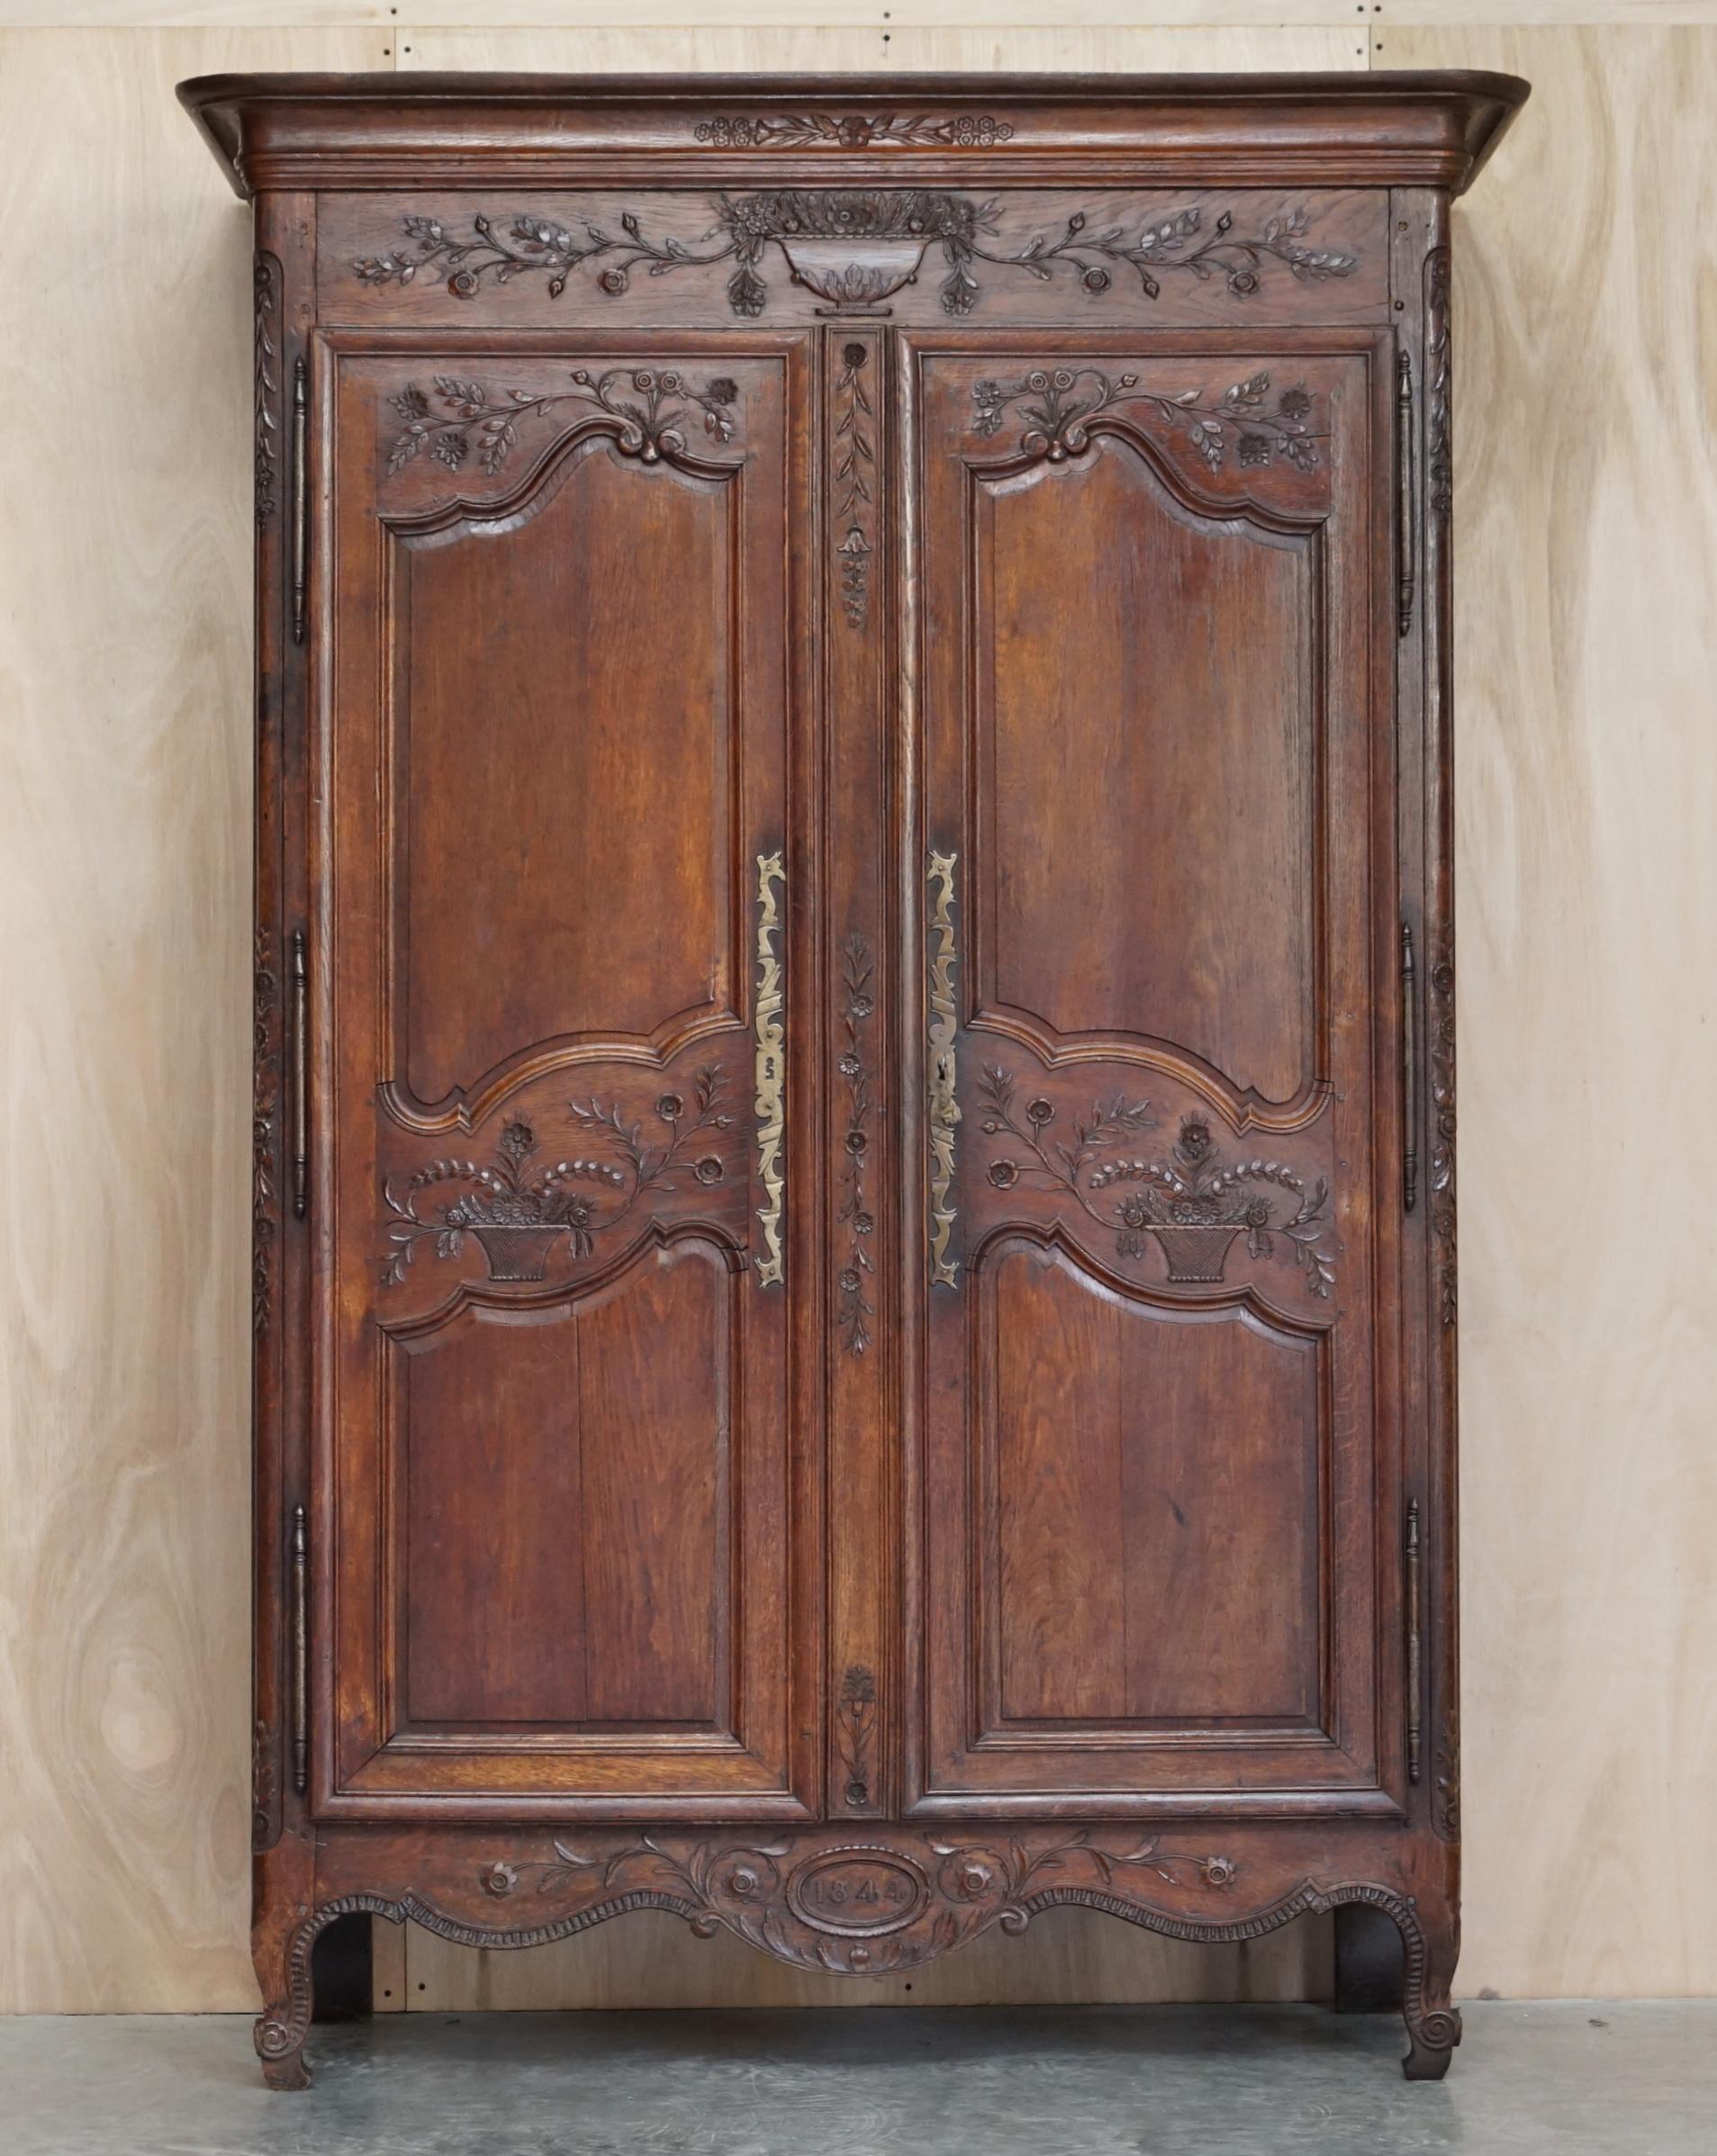 We are delighted to offer for sale this very grand, hand carved extremely large continental oak wardrobe dated to the base 1844

A truly stunning piece, this is a tour de force of carving, its all oak with solid brass fittings and the original